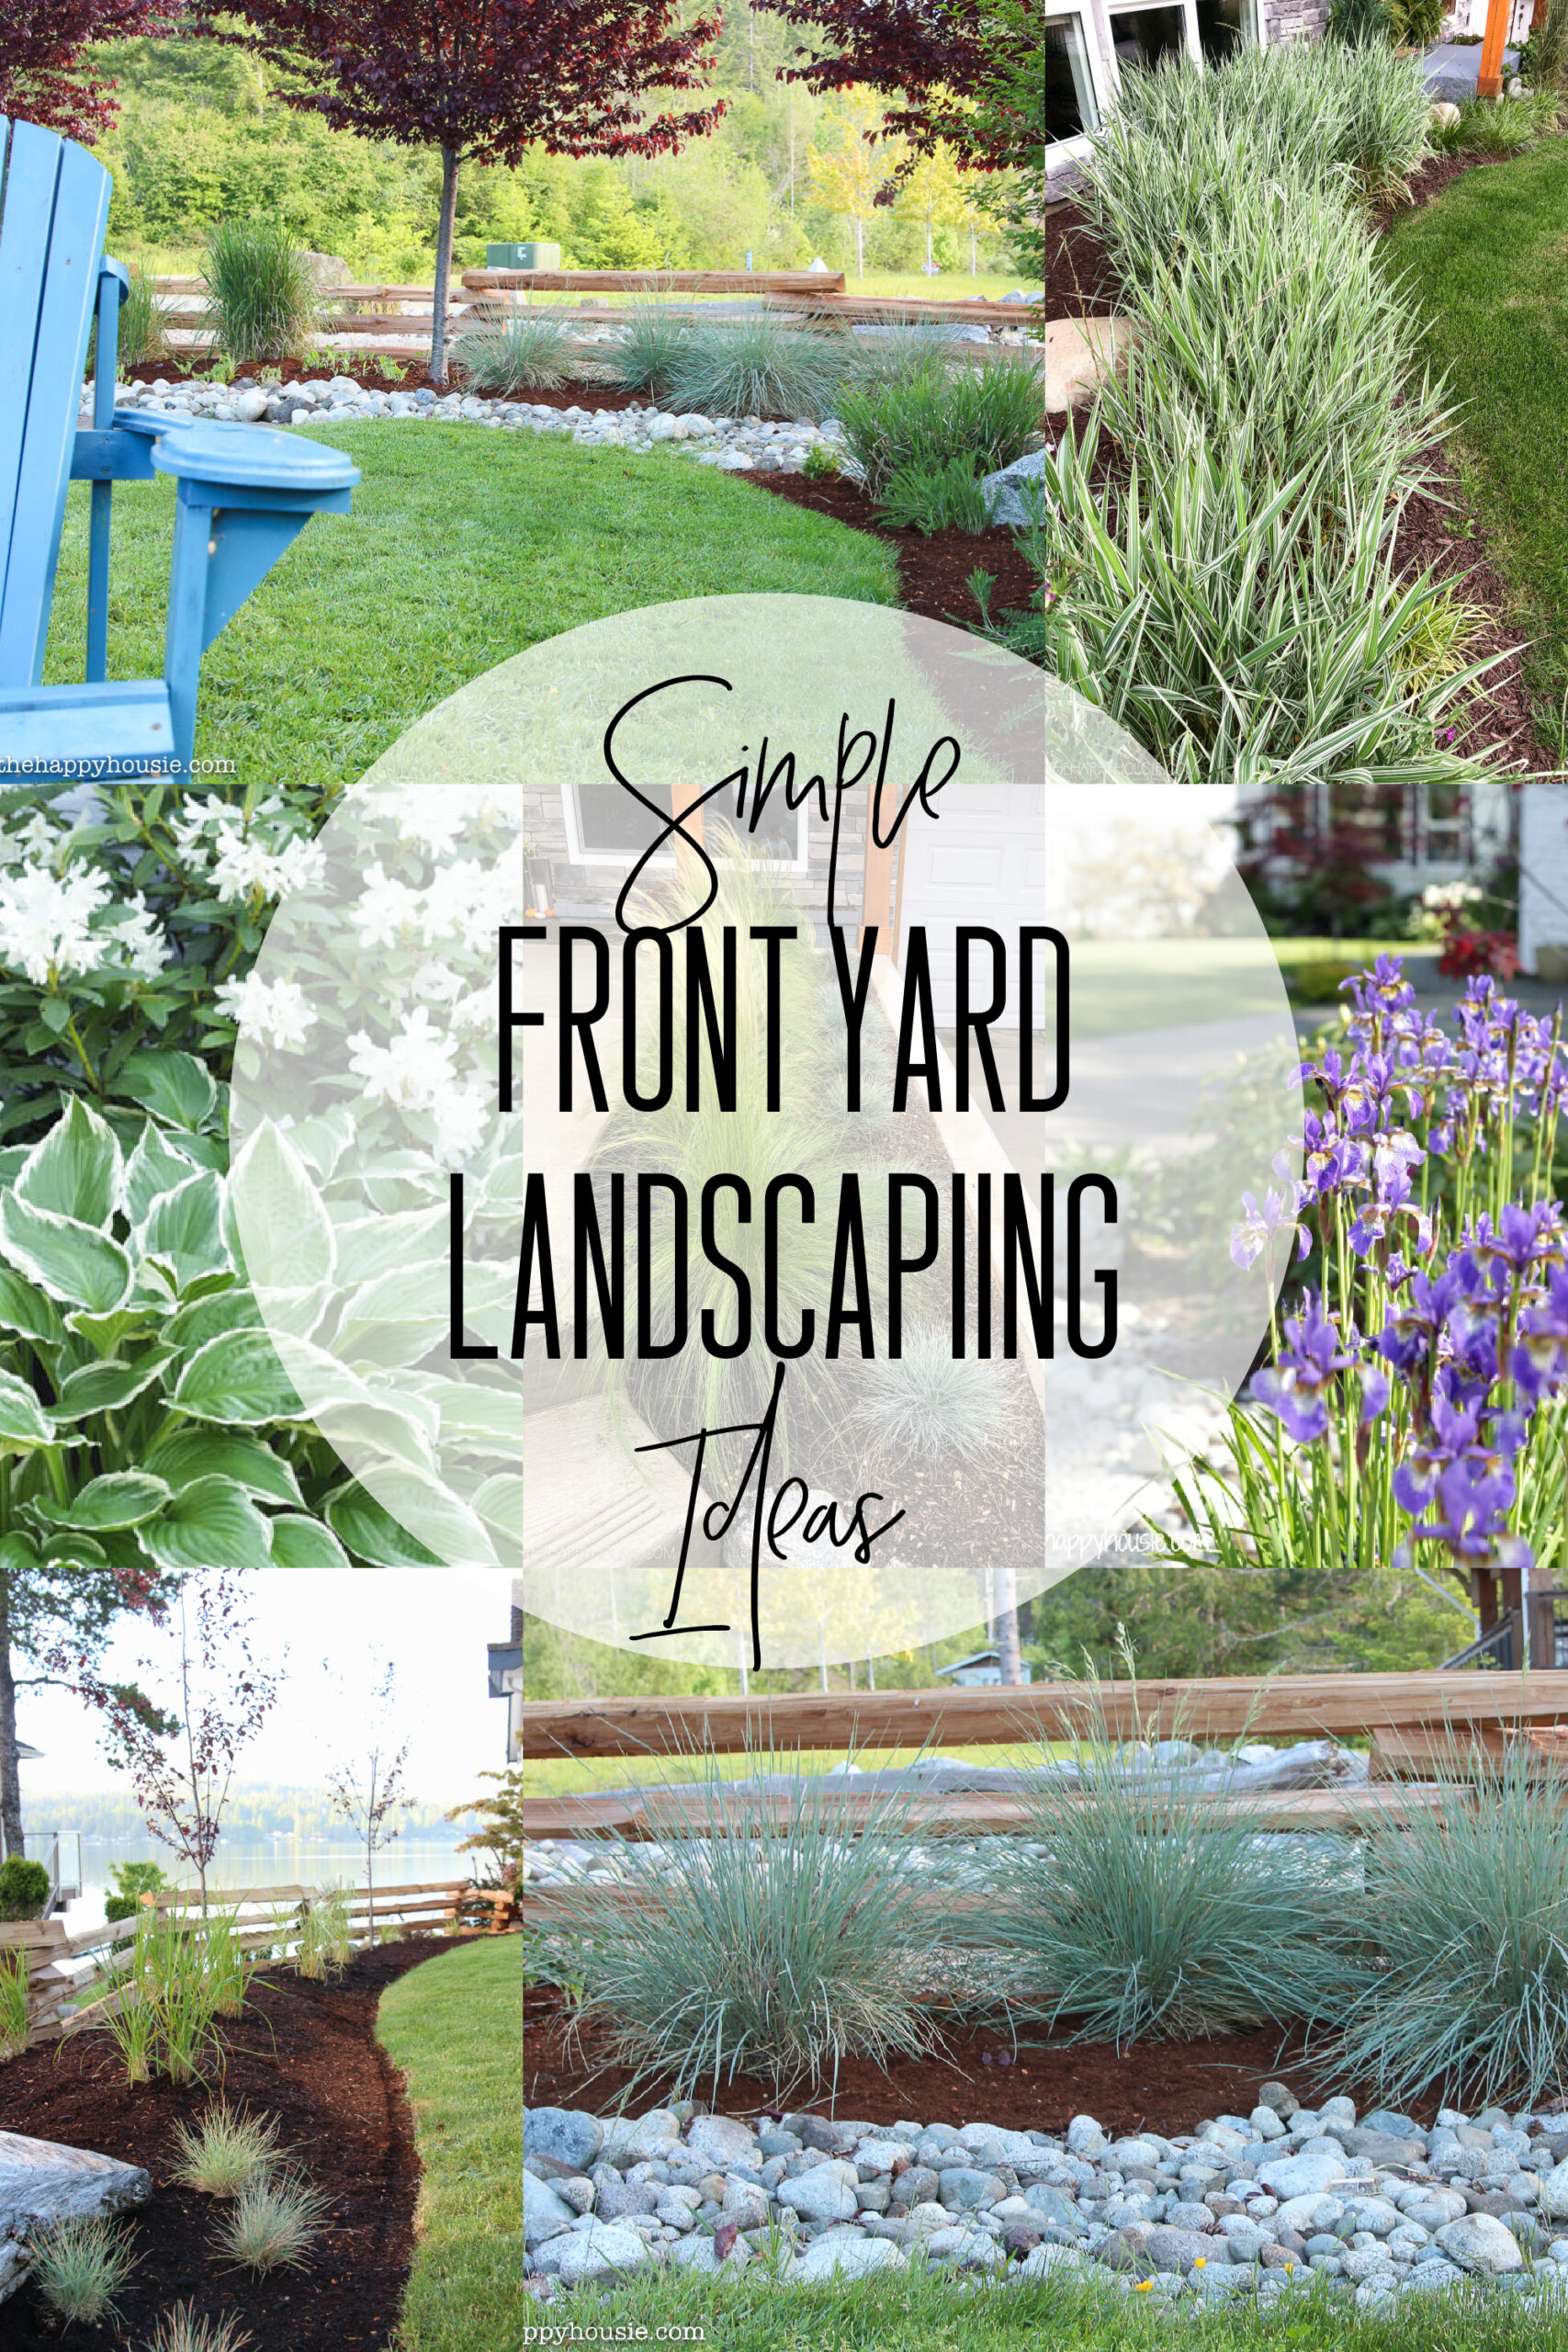 a collage image with front yard landscaping ideas